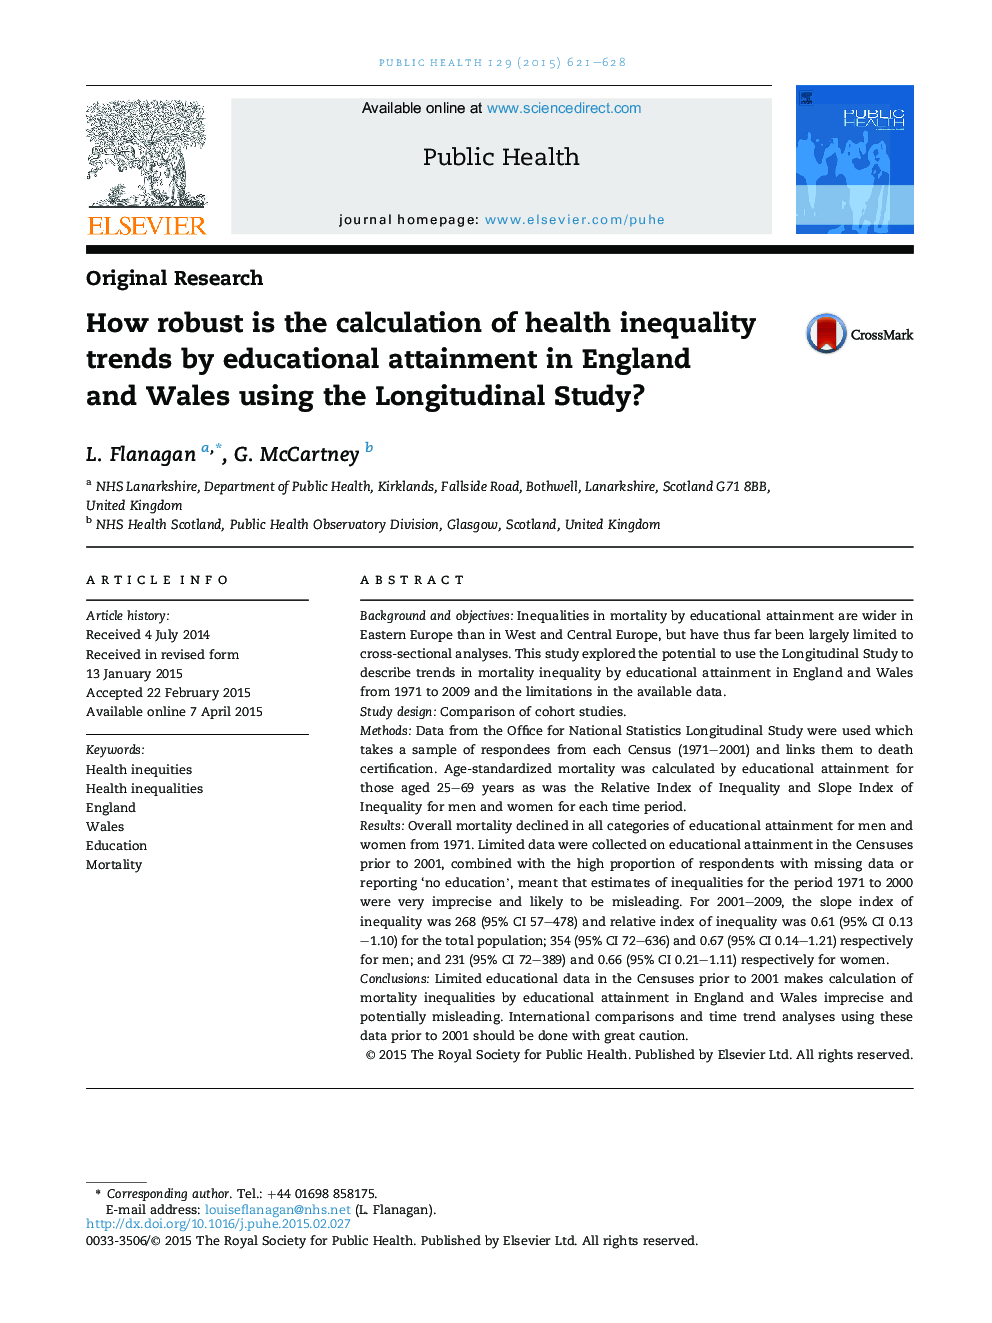 How robust is the calculation of health inequality trends by educational attainment in England and Wales using the Longitudinal Study?